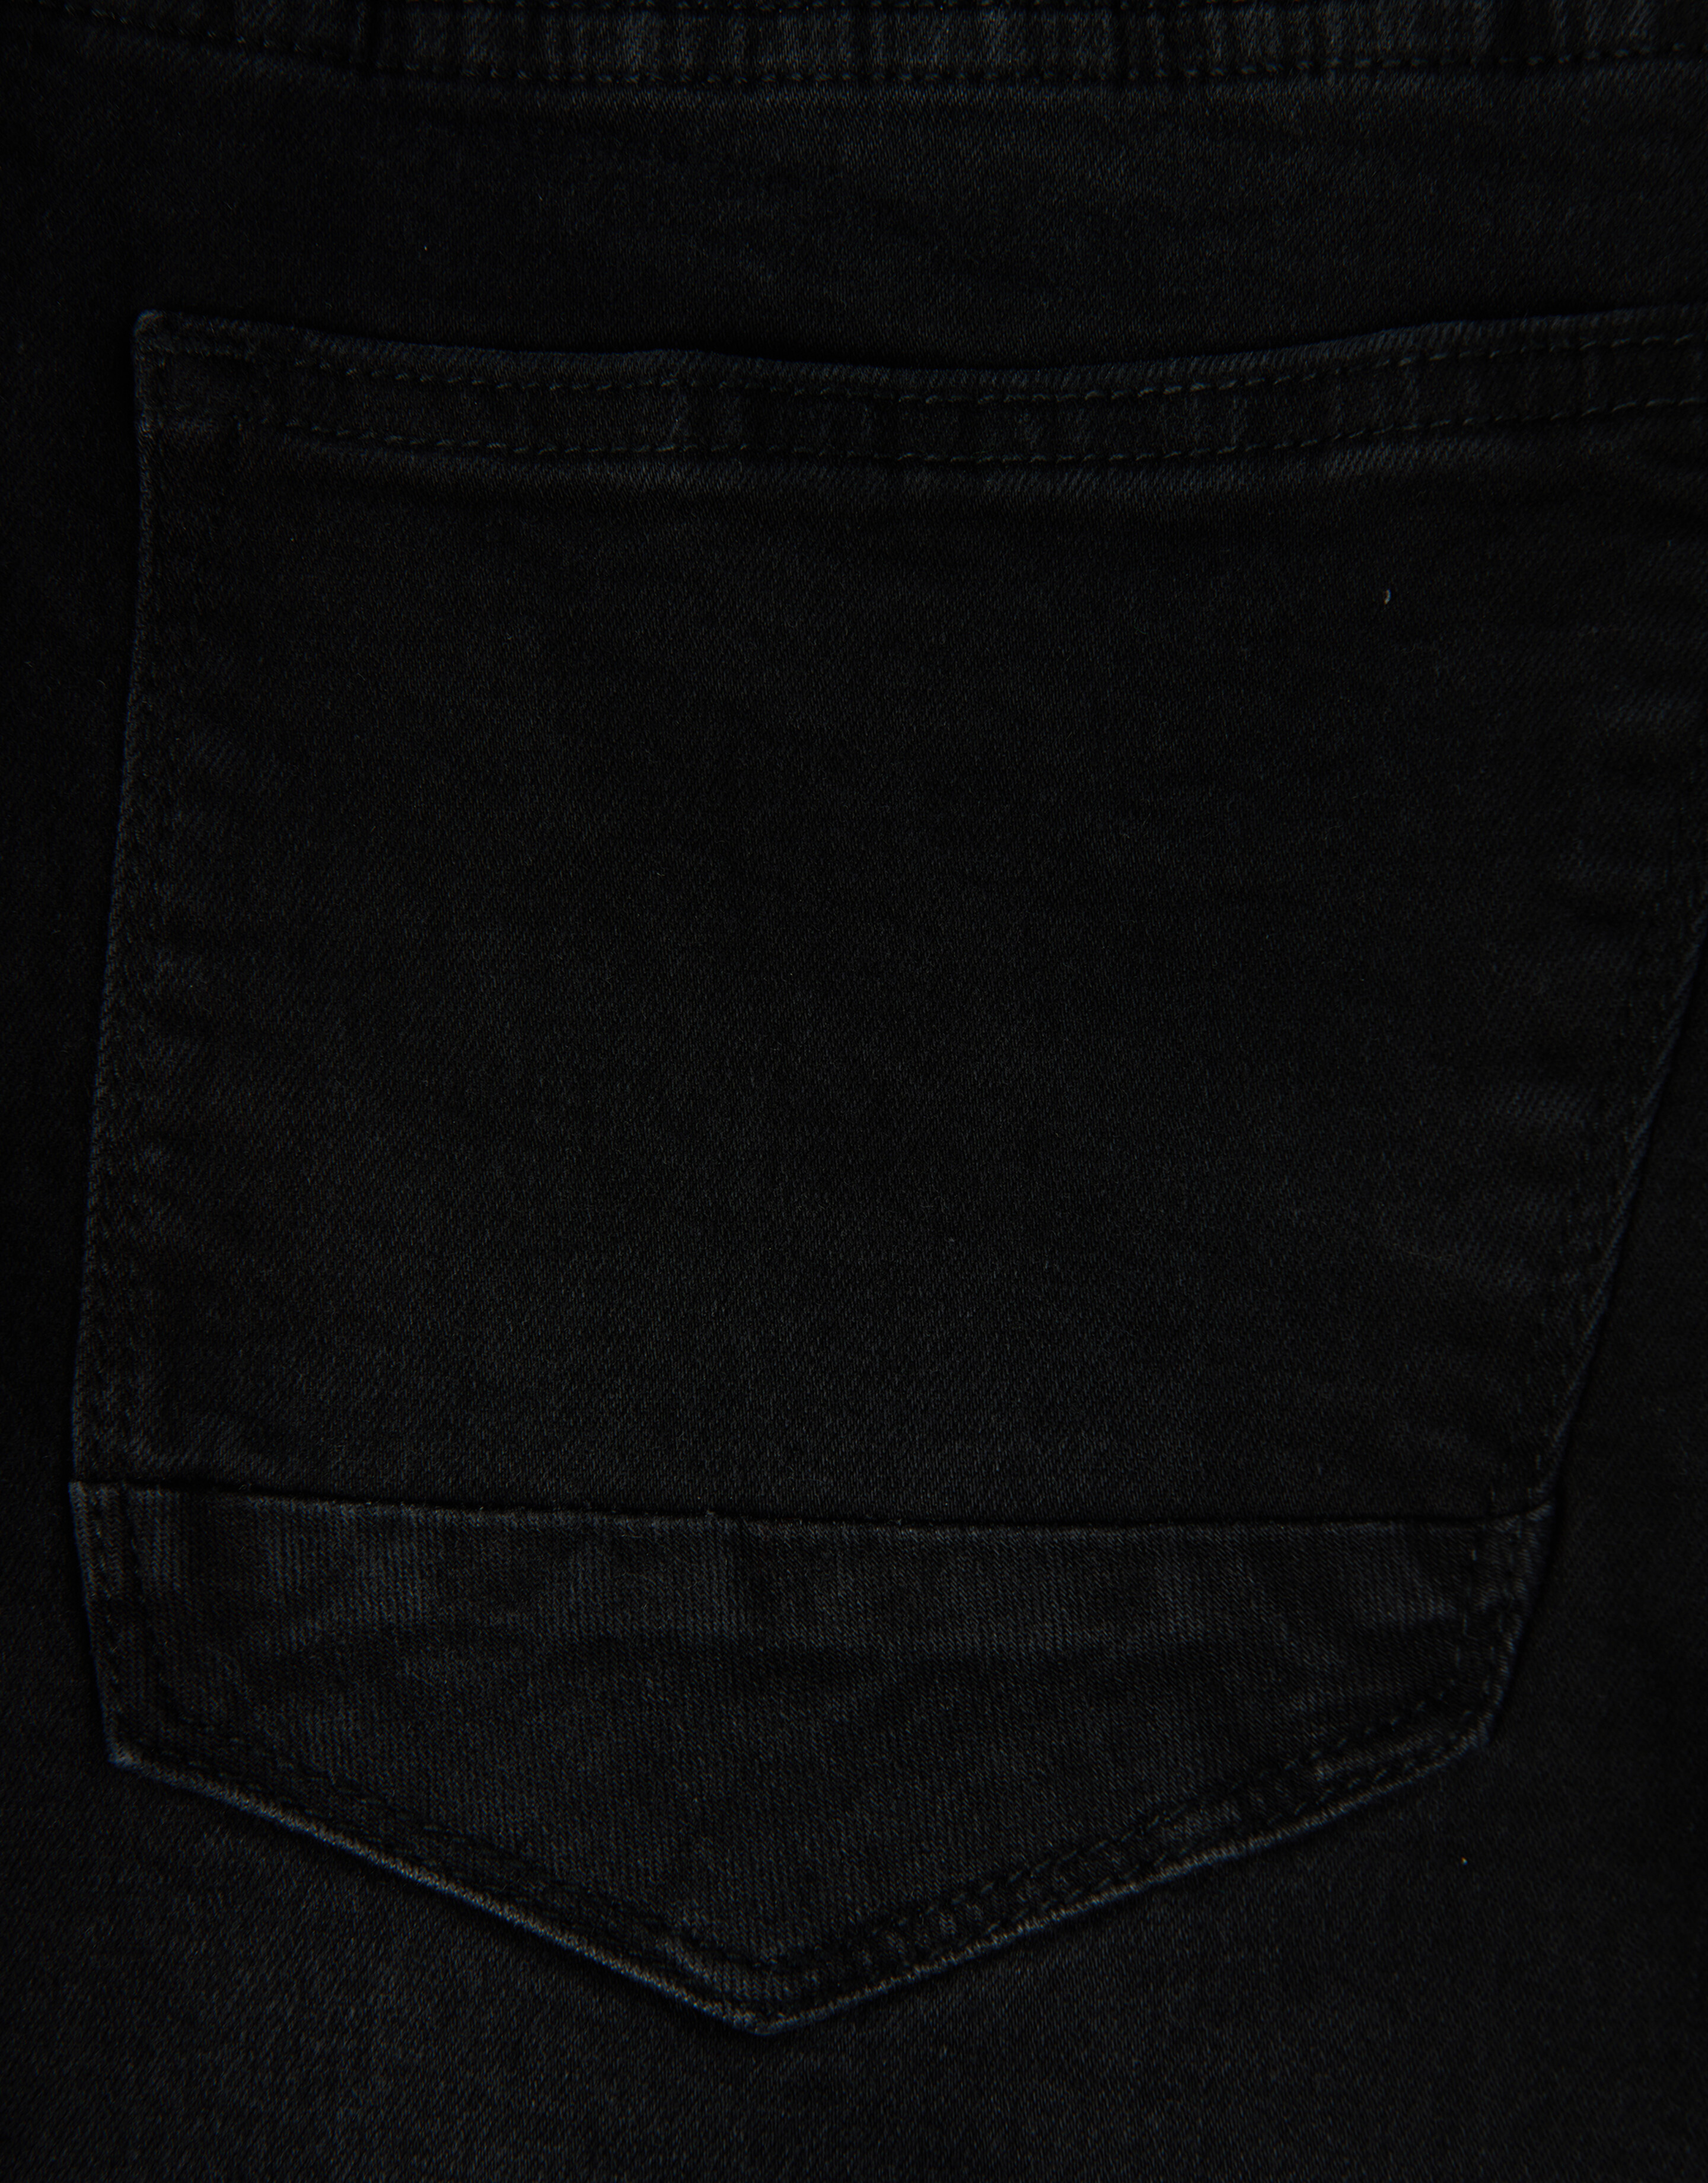 Straight Jeans Washed Black L32 Refill